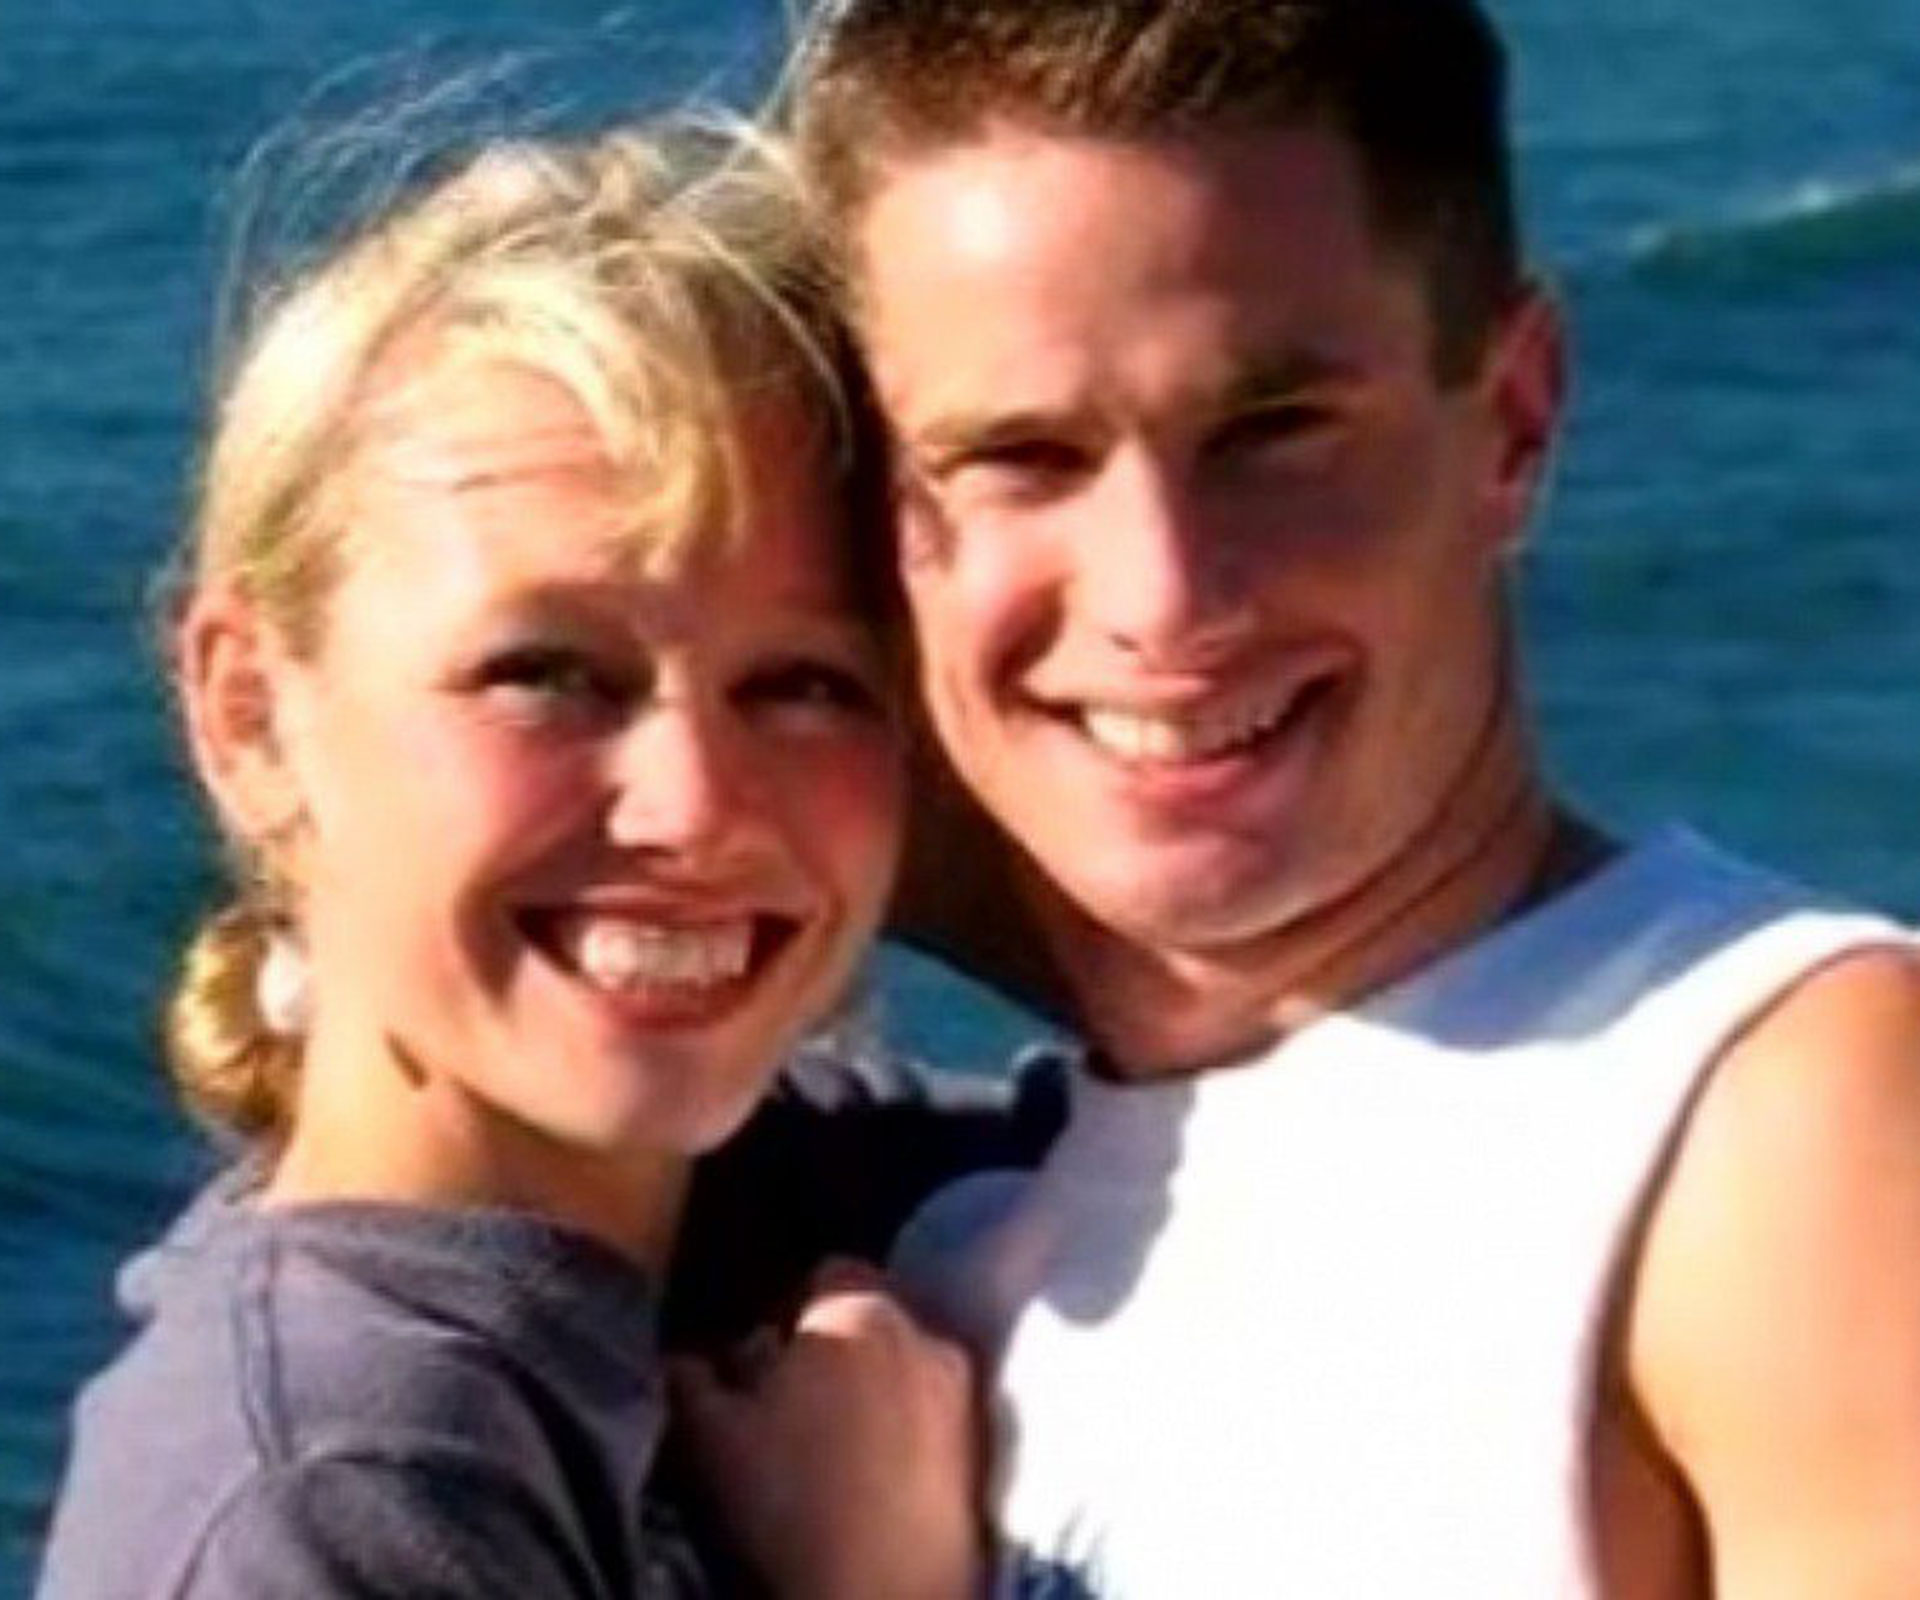 A ‘message’ burned into her skin: Sherri Papini’s abductor’s cruellest act